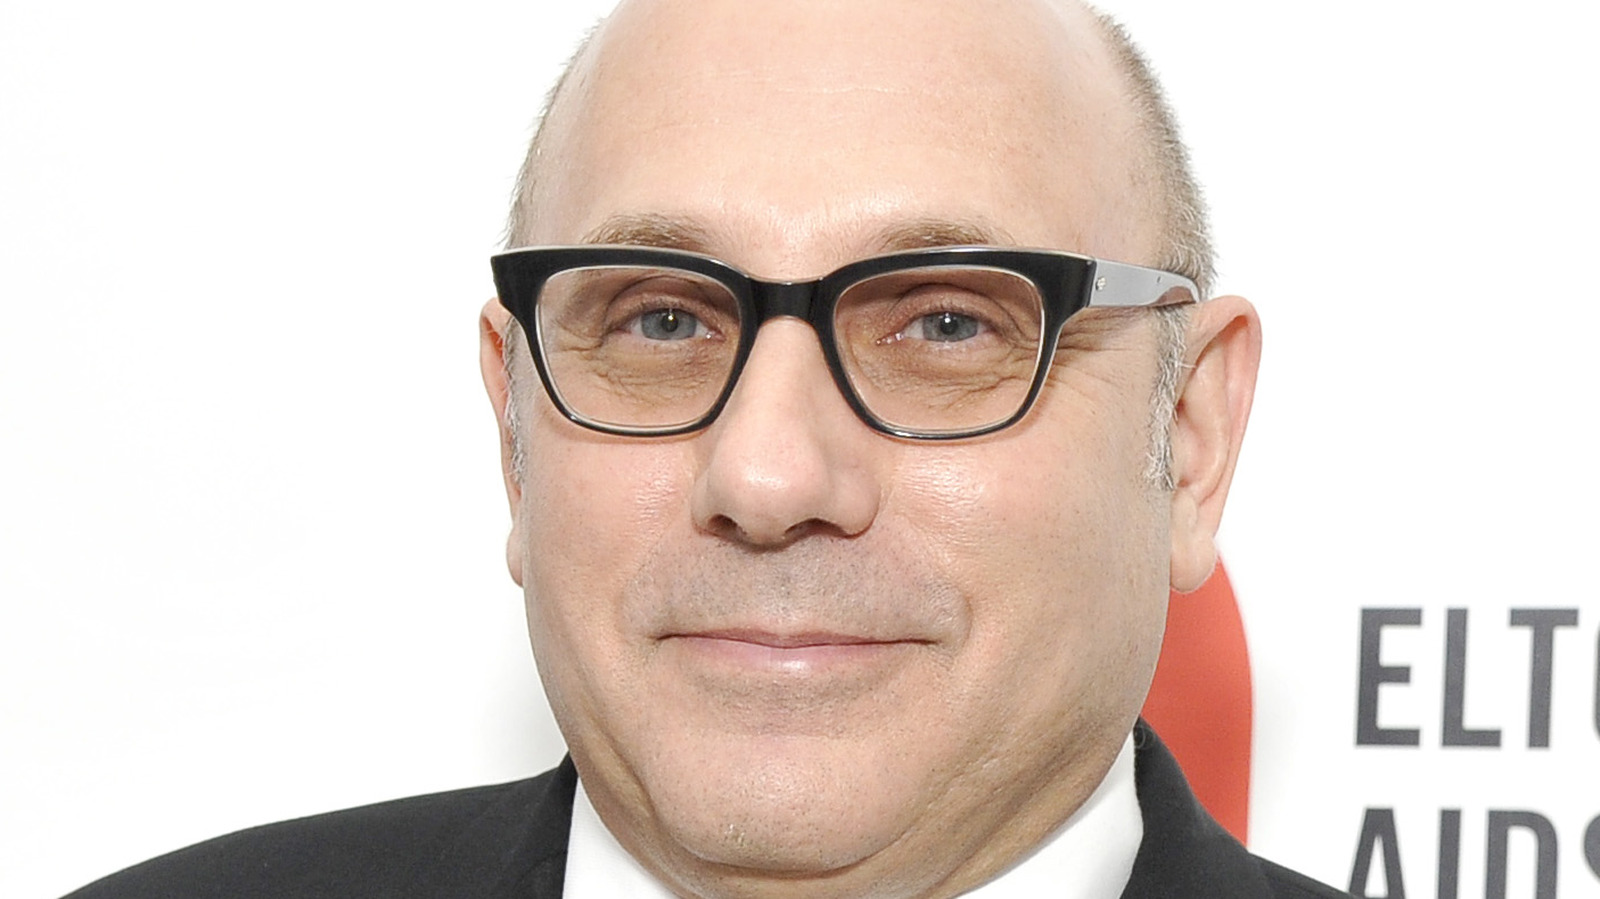 Willie Garson's Cause Of Death Has Been Revealed